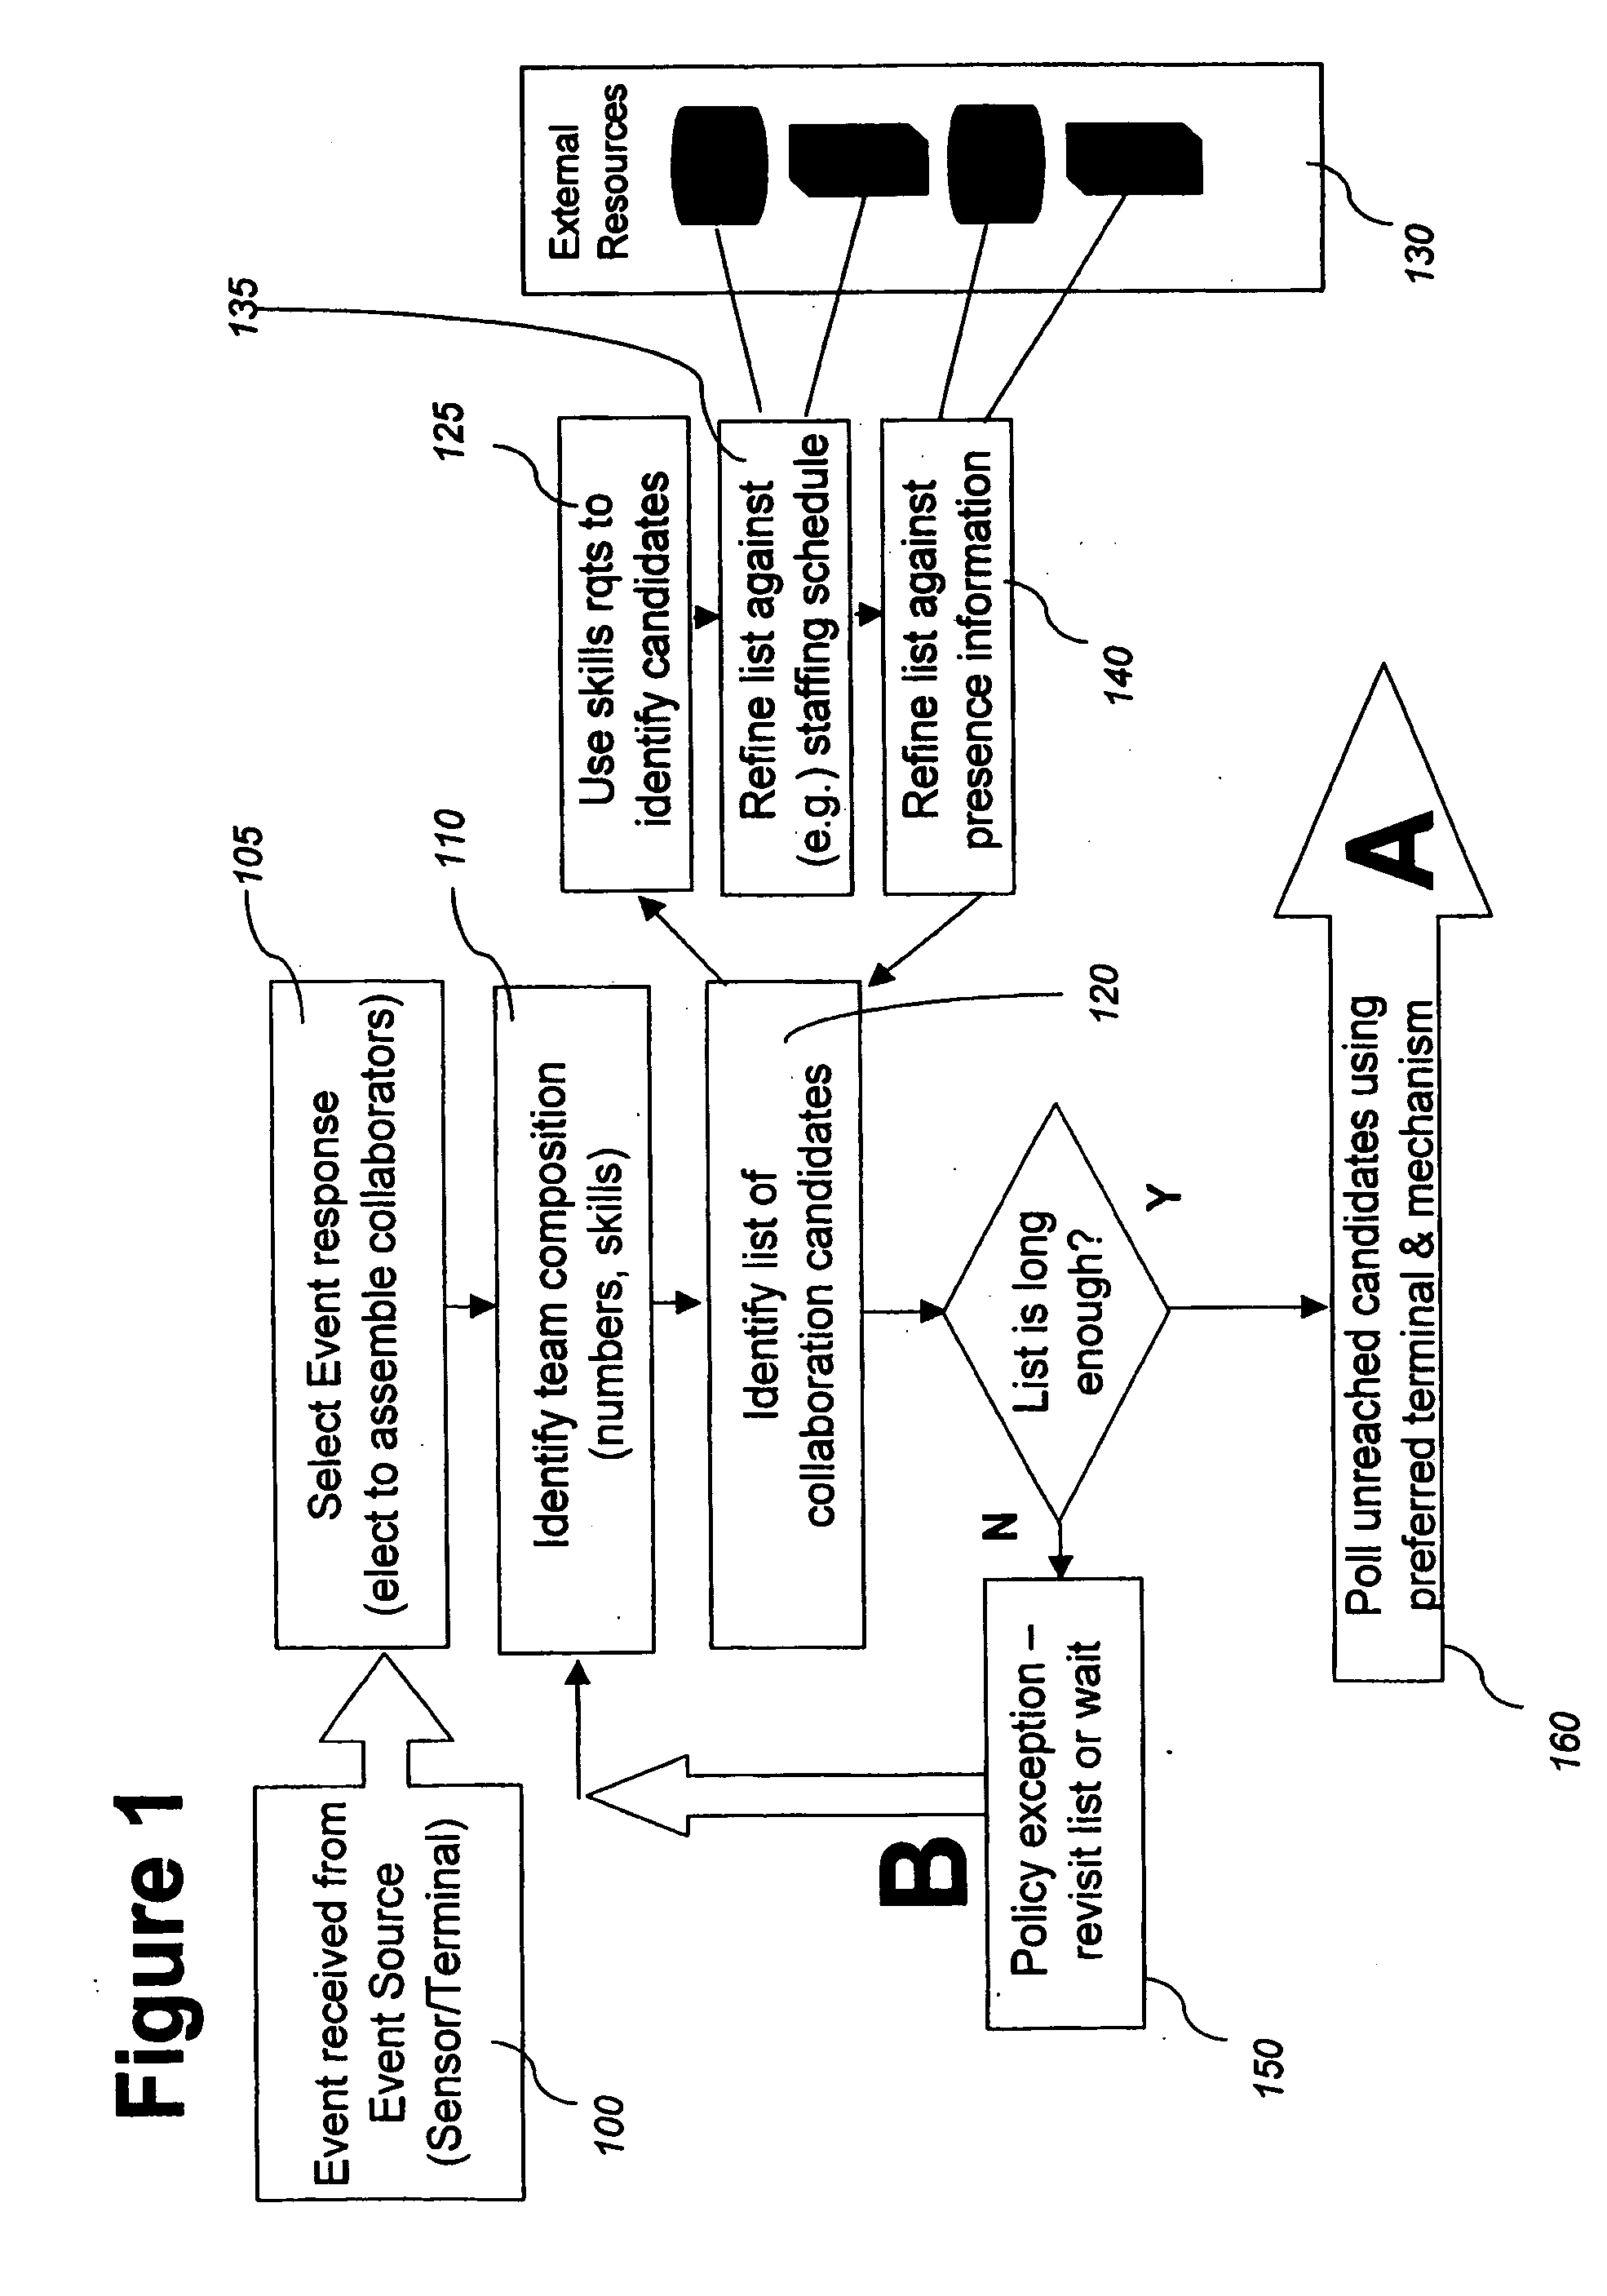 Method and system for enhancing collaboration